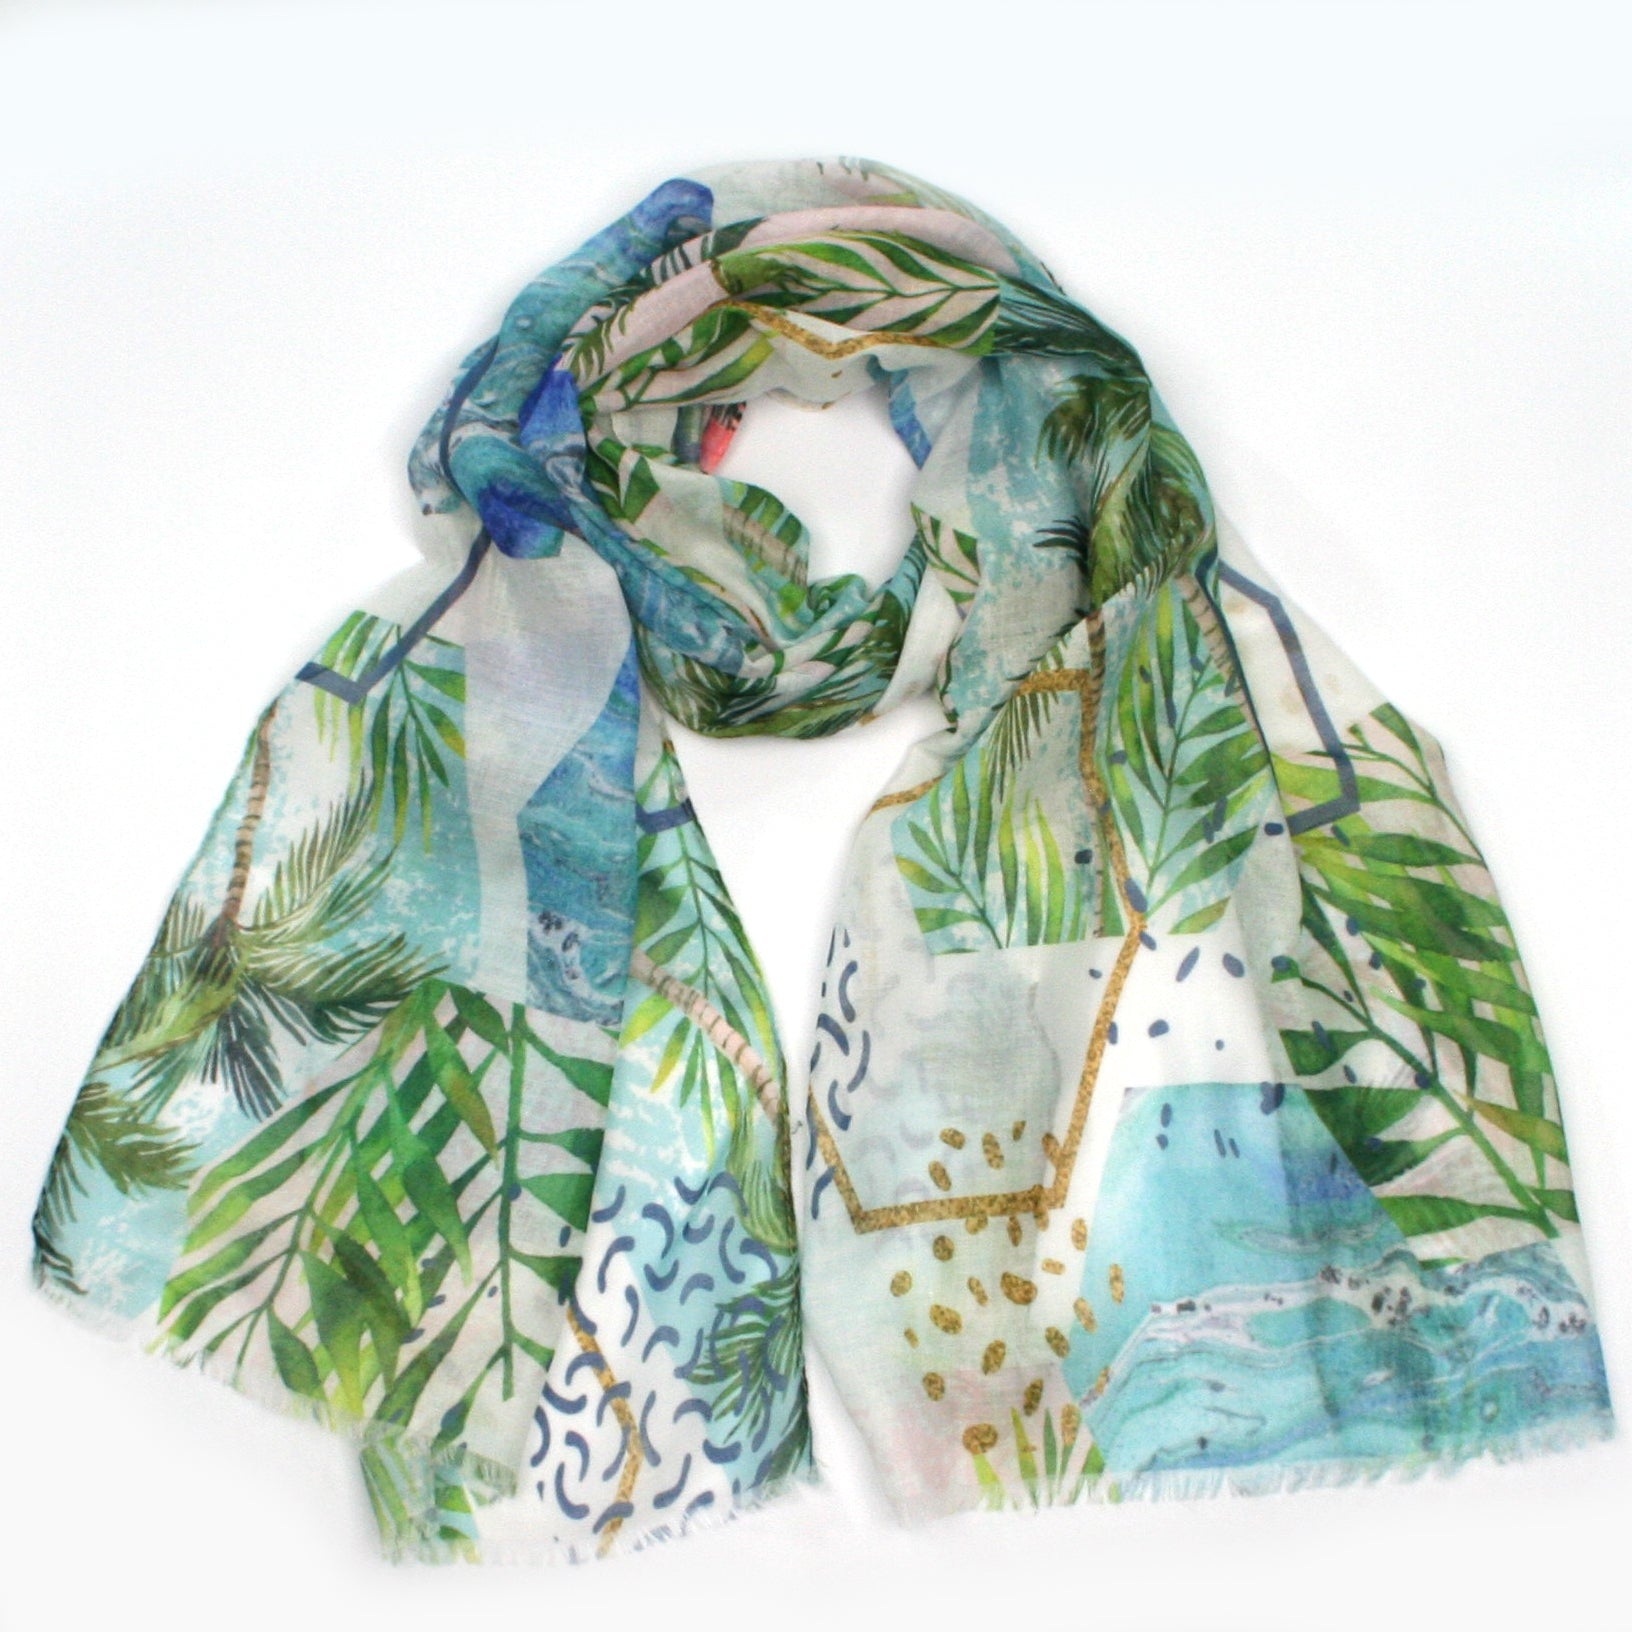 Hexagonal Patterned Tropical Leaves Ladies Scarf – Stylish & Luxurious – Unisex – The Scarf Giraffe